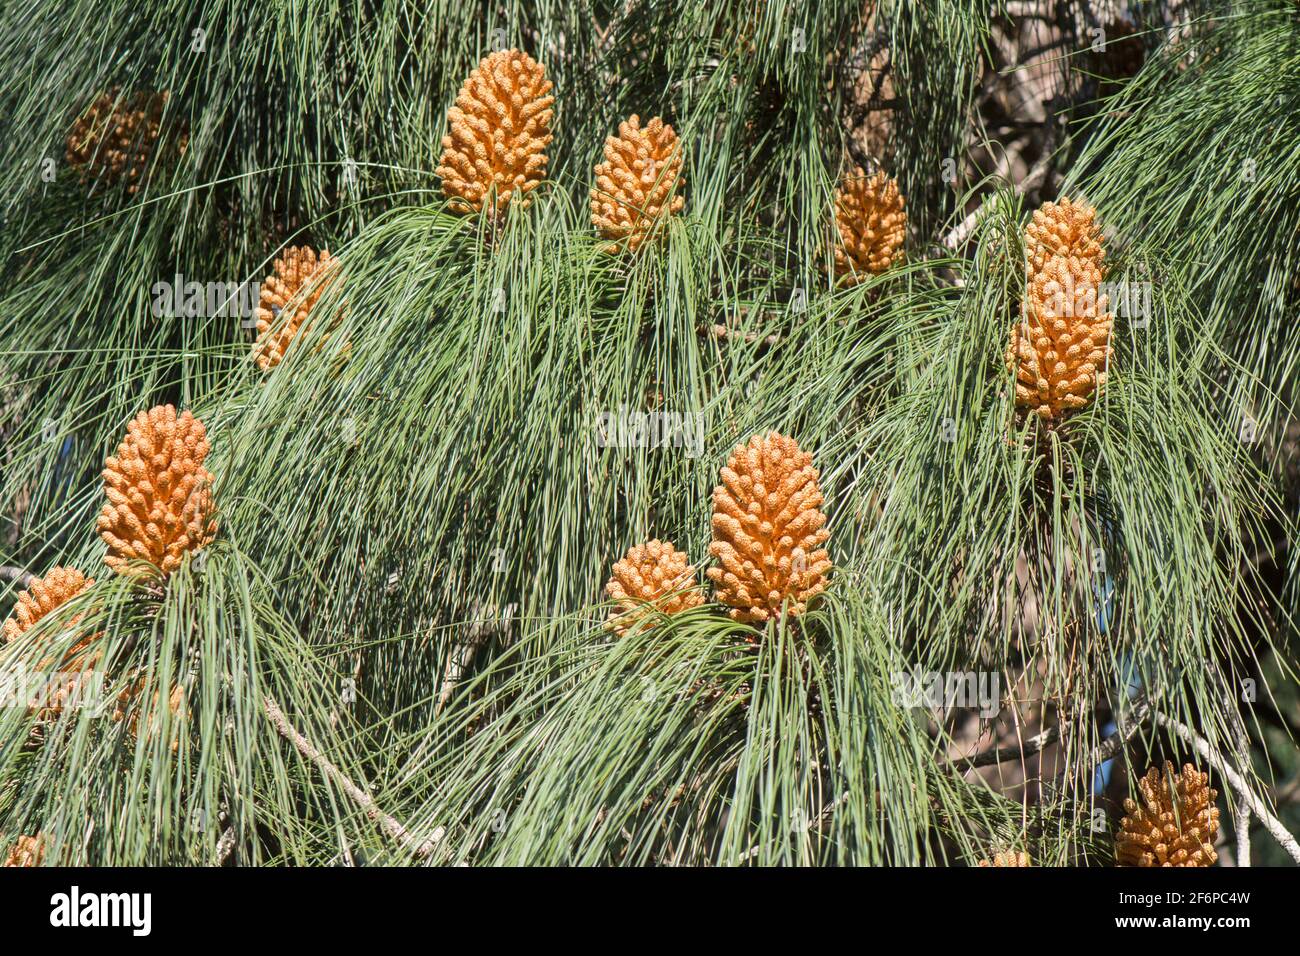 Immature male cones of  Pinus canariensis, the Canary Island pine, Spain, Europe. Stock Photo